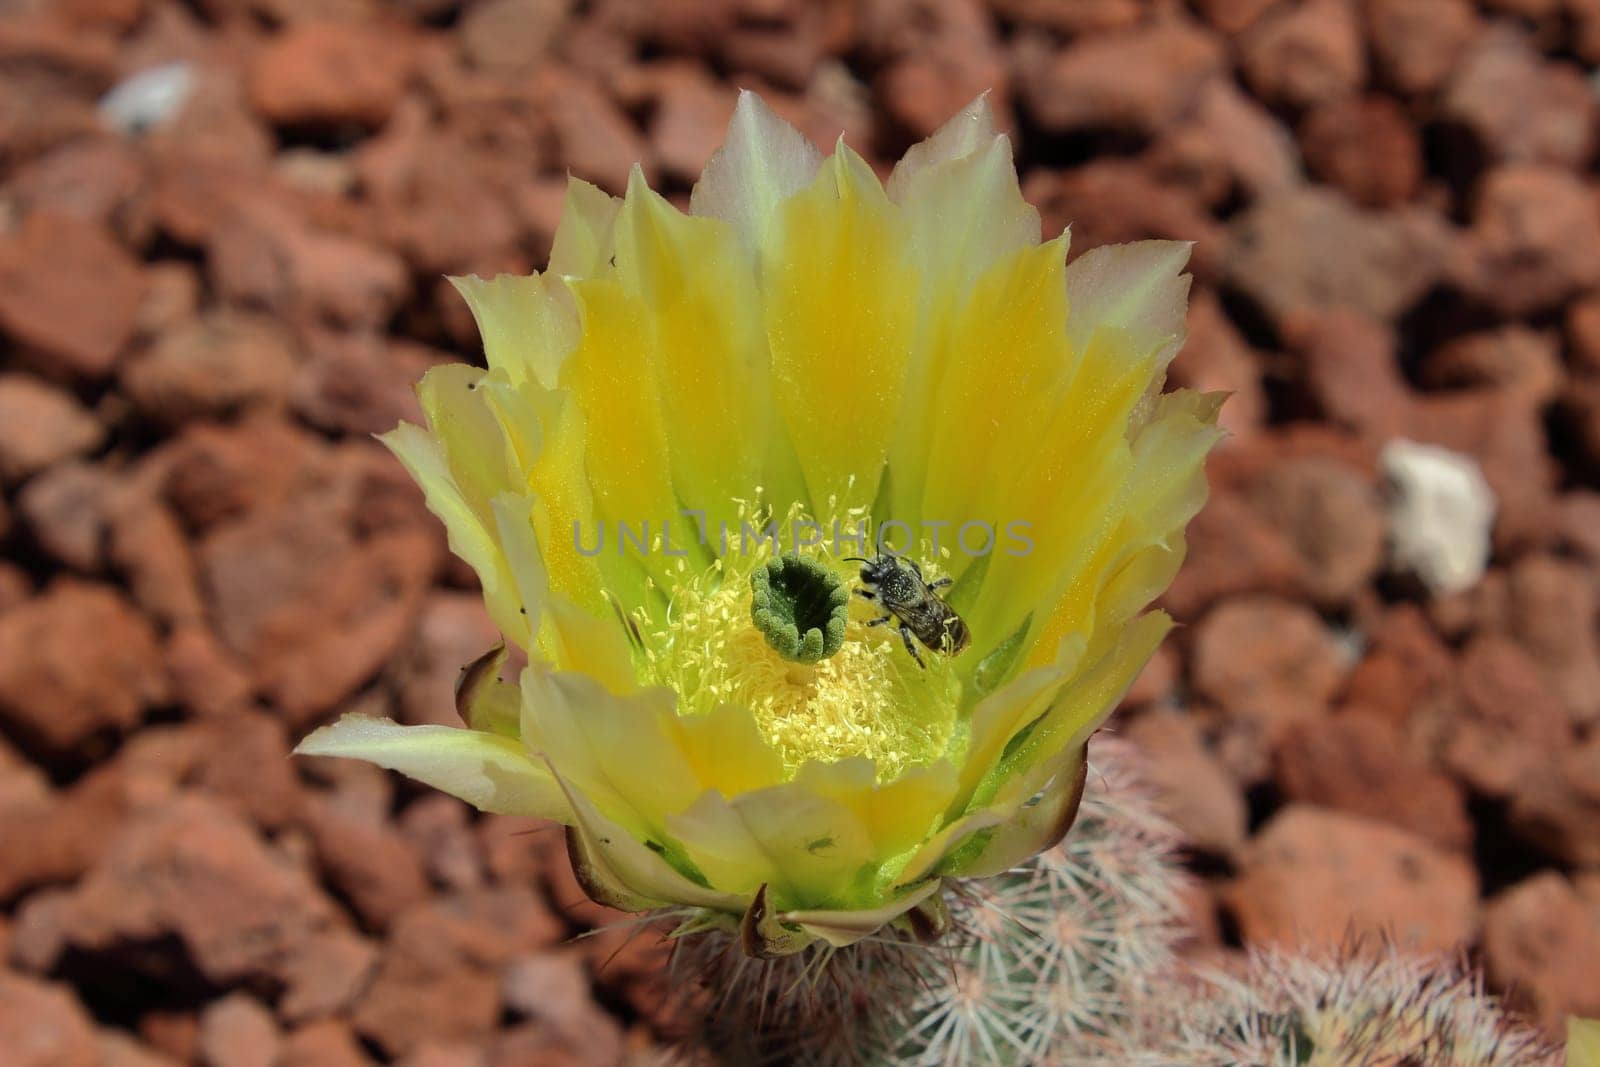 Texas Rainbow Hedgehog or Yellow pitaya Cactus Echinocereus dasyacanthus visited by a bee flowering in Texas, USA. by Marcielito